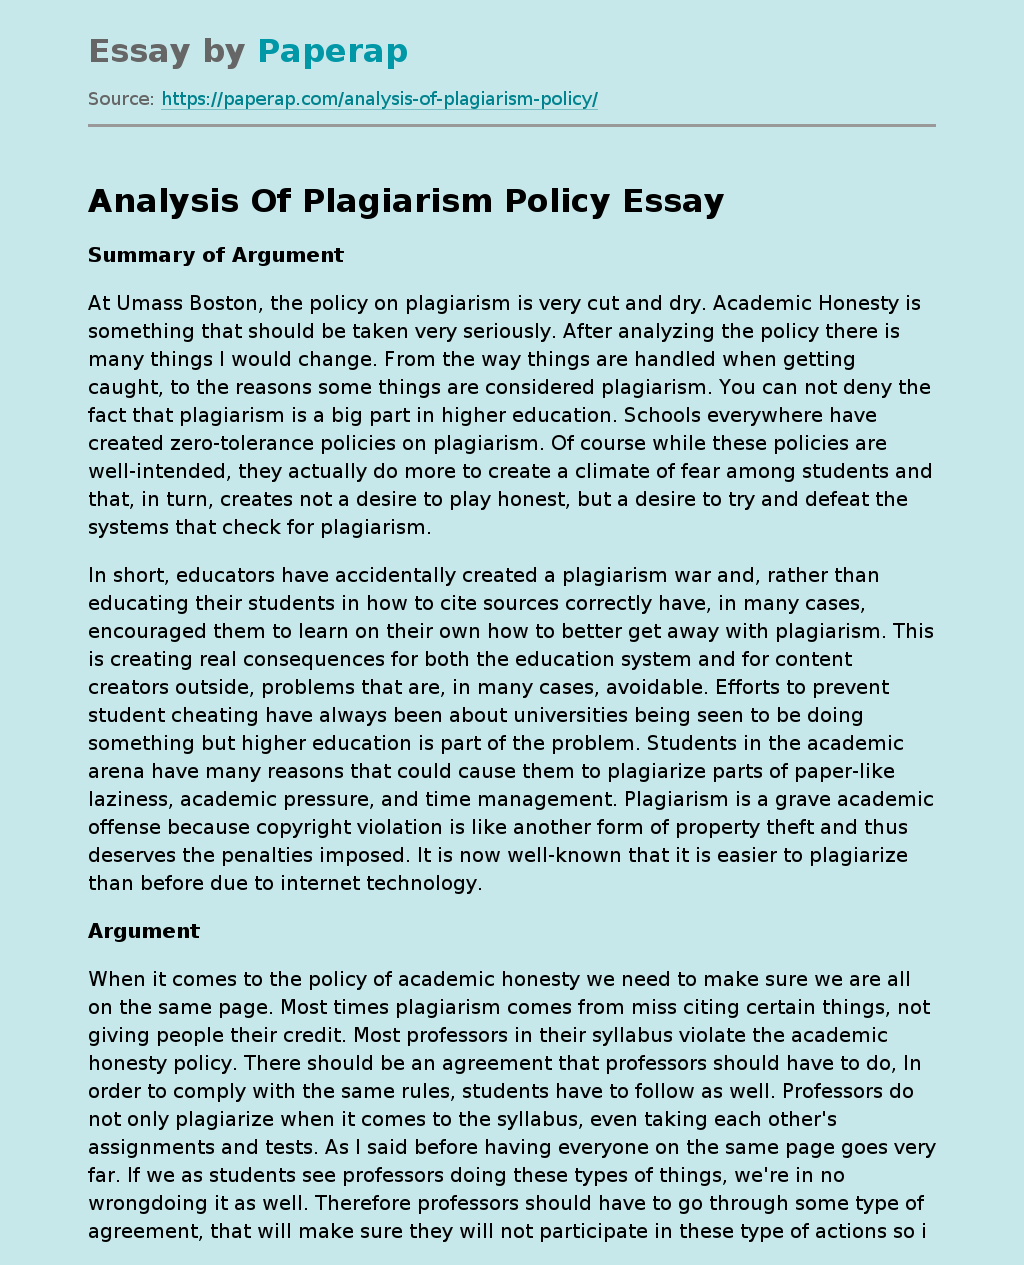 Analysis Of Plagiarism Policy